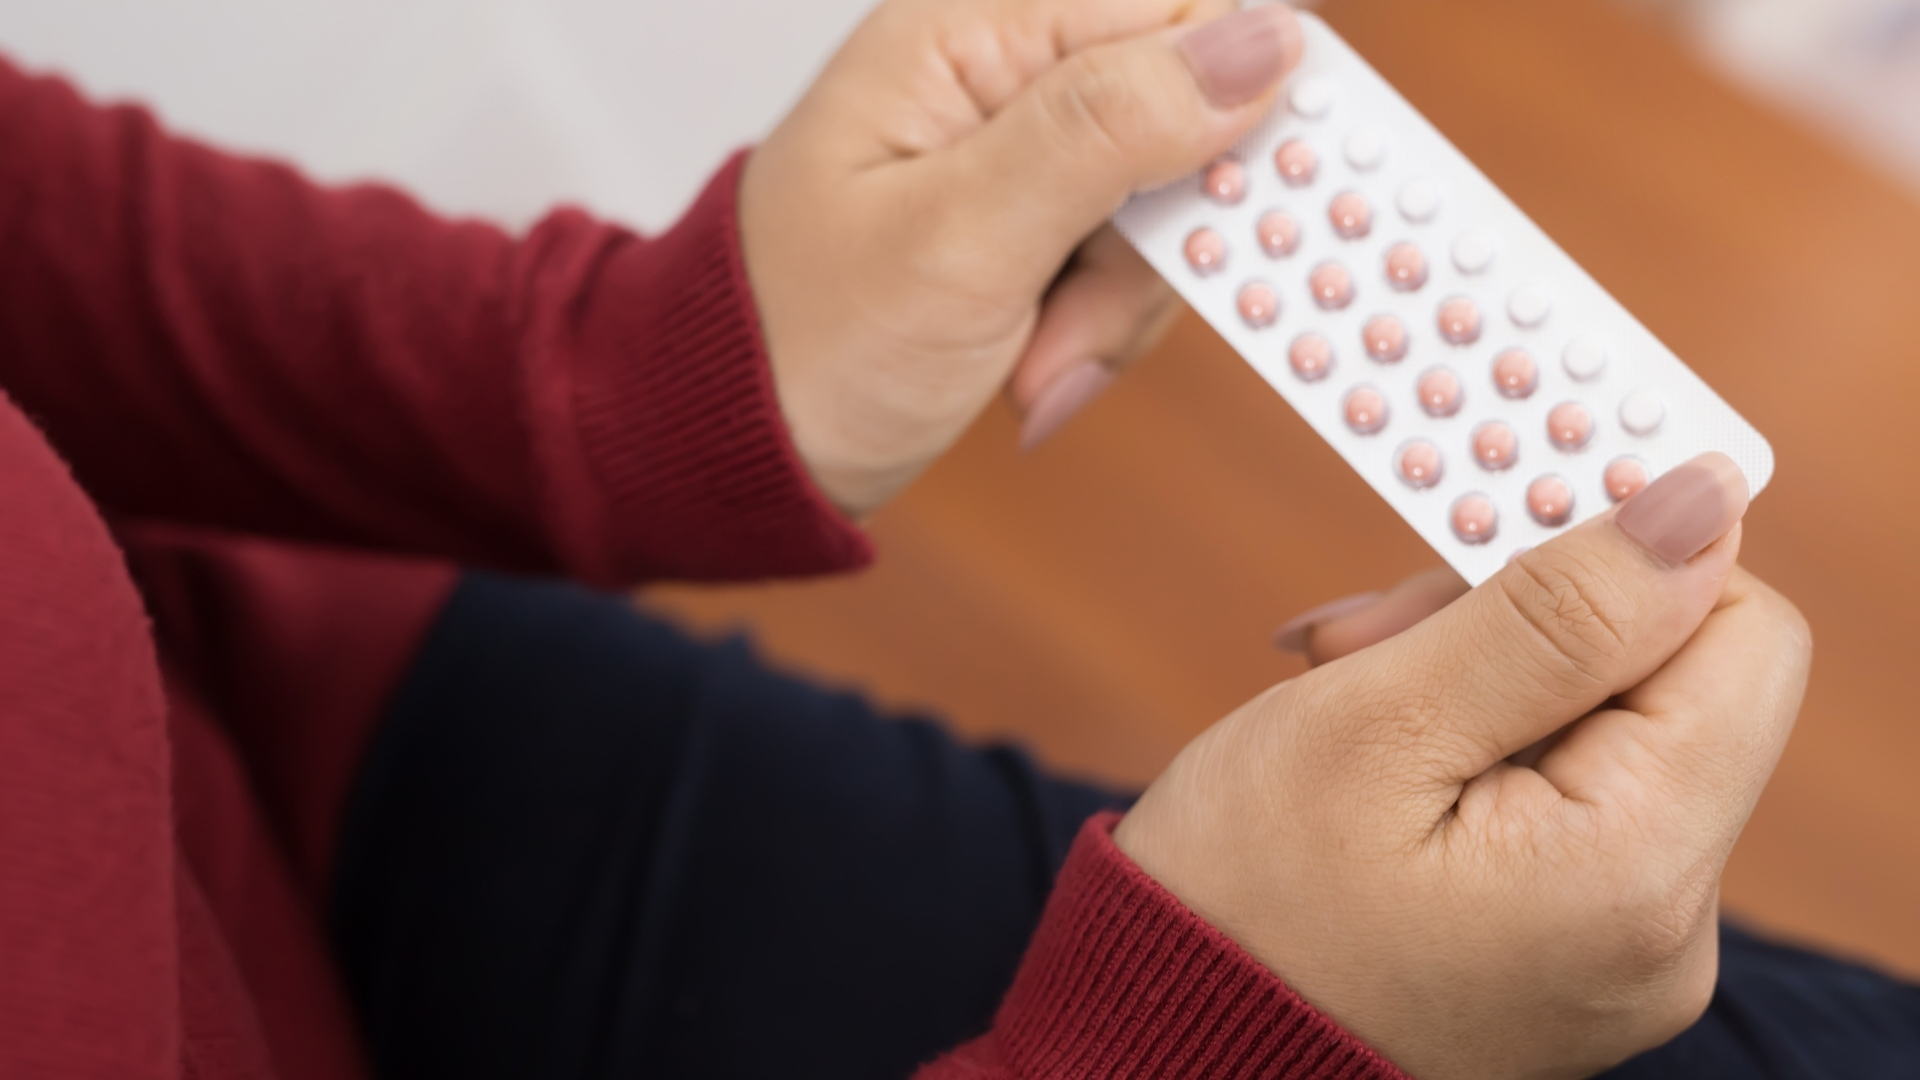 How Soon Can I Get Pregnant After Stopping Birth Control? Hormones